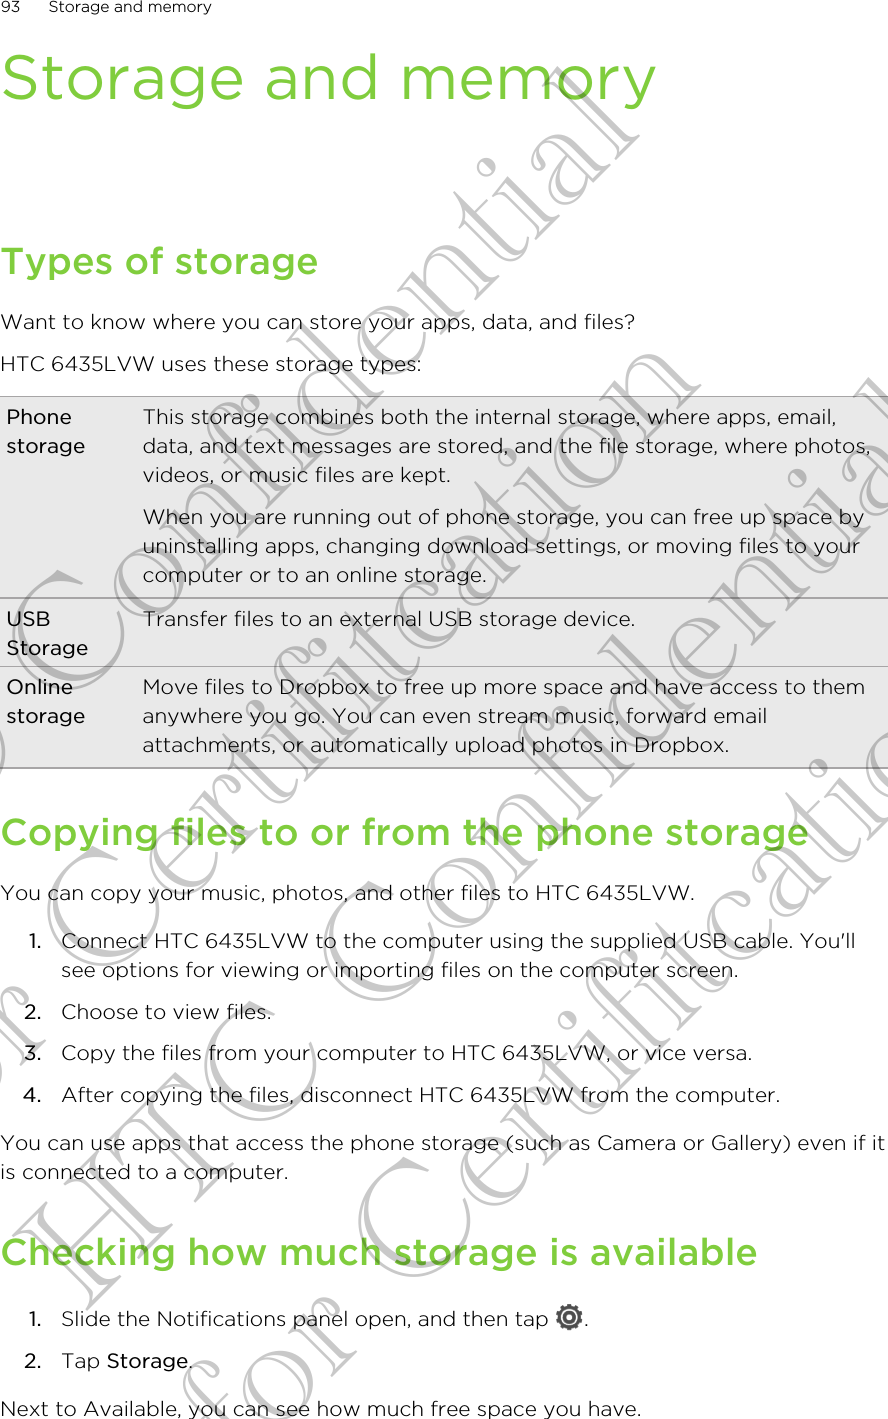 Storage and memoryTypes of storageWant to know where you can store your apps, data, and files?HTC 6435LVW uses these storage types:PhonestorageThis storage combines both the internal storage, where apps, email,data, and text messages are stored, and the file storage, where photos,videos, or music files are kept.When you are running out of phone storage, you can free up space byuninstalling apps, changing download settings, or moving files to yourcomputer or to an online storage.USBStorageTransfer files to an external USB storage device.OnlinestorageMove files to Dropbox to free up more space and have access to themanywhere you go. You can even stream music, forward emailattachments, or automatically upload photos in Dropbox.Copying files to or from the phone storageYou can copy your music, photos, and other files to HTC 6435LVW.1. Connect HTC 6435LVW to the computer using the supplied USB cable. You&apos;llsee options for viewing or importing files on the computer screen.2. Choose to view files.3. Copy the files from your computer to HTC 6435LVW, or vice versa.4. After copying the files, disconnect HTC 6435LVW from the computer.You can use apps that access the phone storage (such as Camera or Gallery) even if itis connected to a computer.Checking how much storage is available1. Slide the Notifications panel open, and then tap  .2. Tap Storage.Next to Available, you can see how much free space you have.93 Storage and memoryHTC Confidential for Certifitcation HTC Confidential for Certifitcation